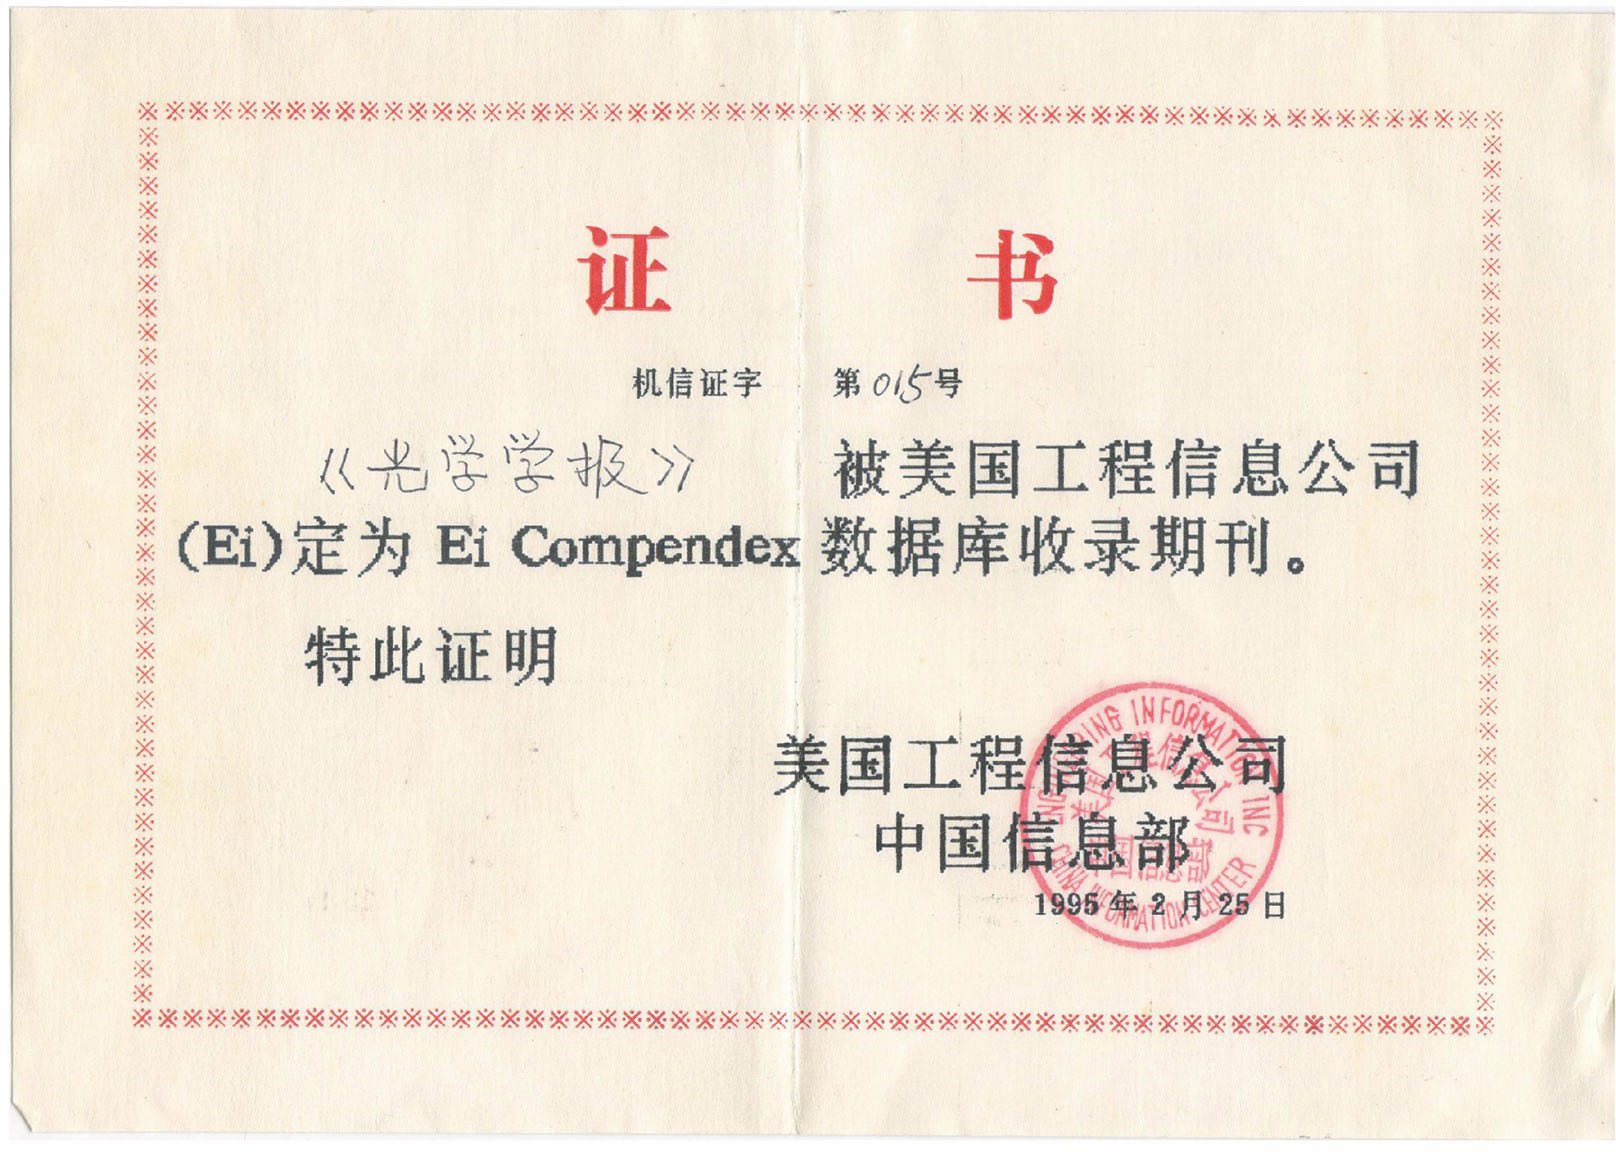 Certificate of Acta Optica Sinica included by EI database